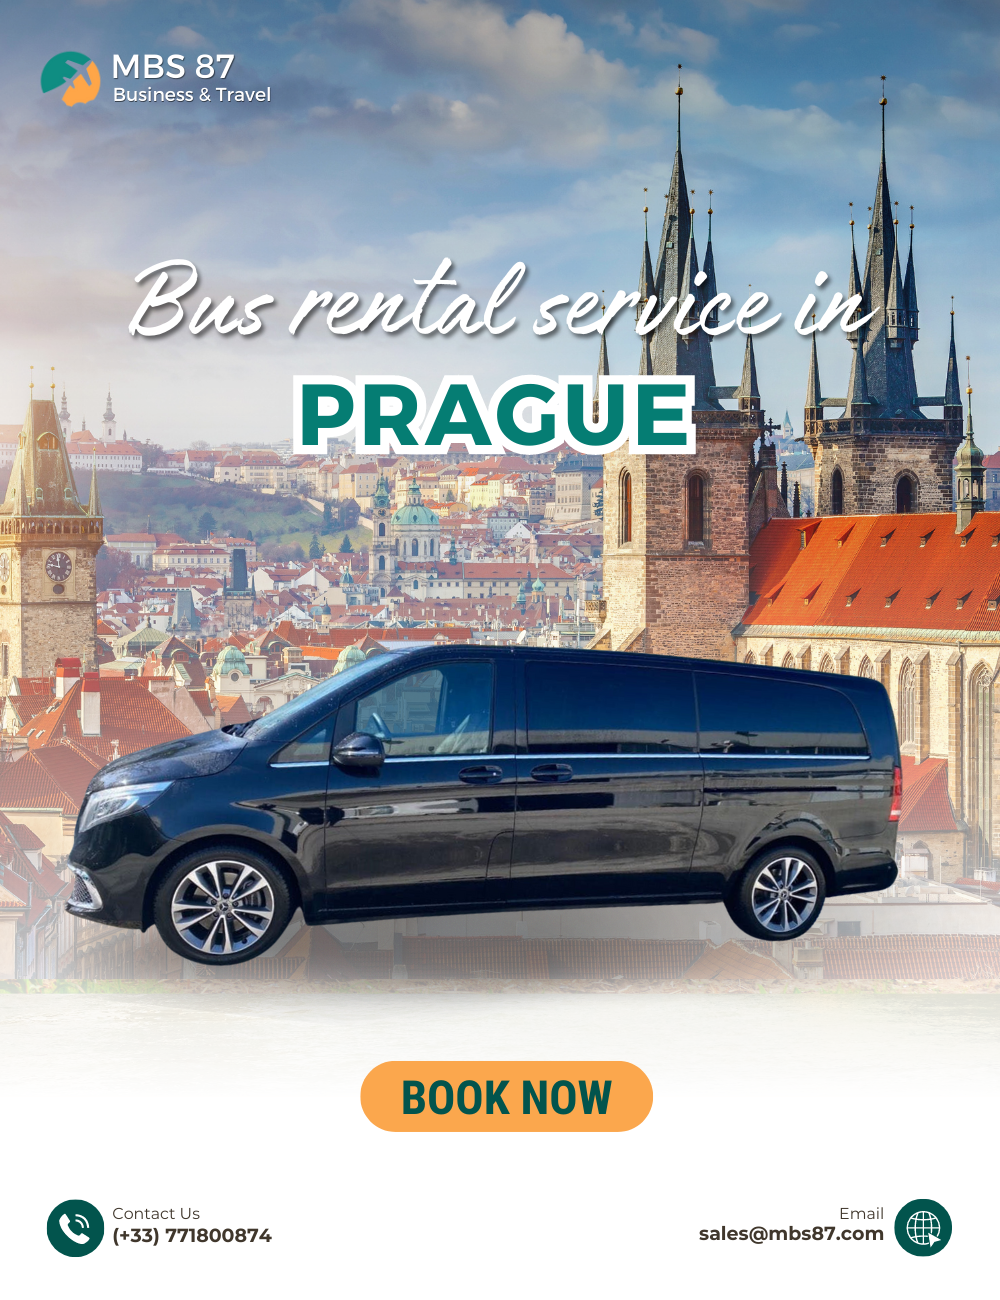 Convenient Travel: City to City Bus Service Starting in Prague